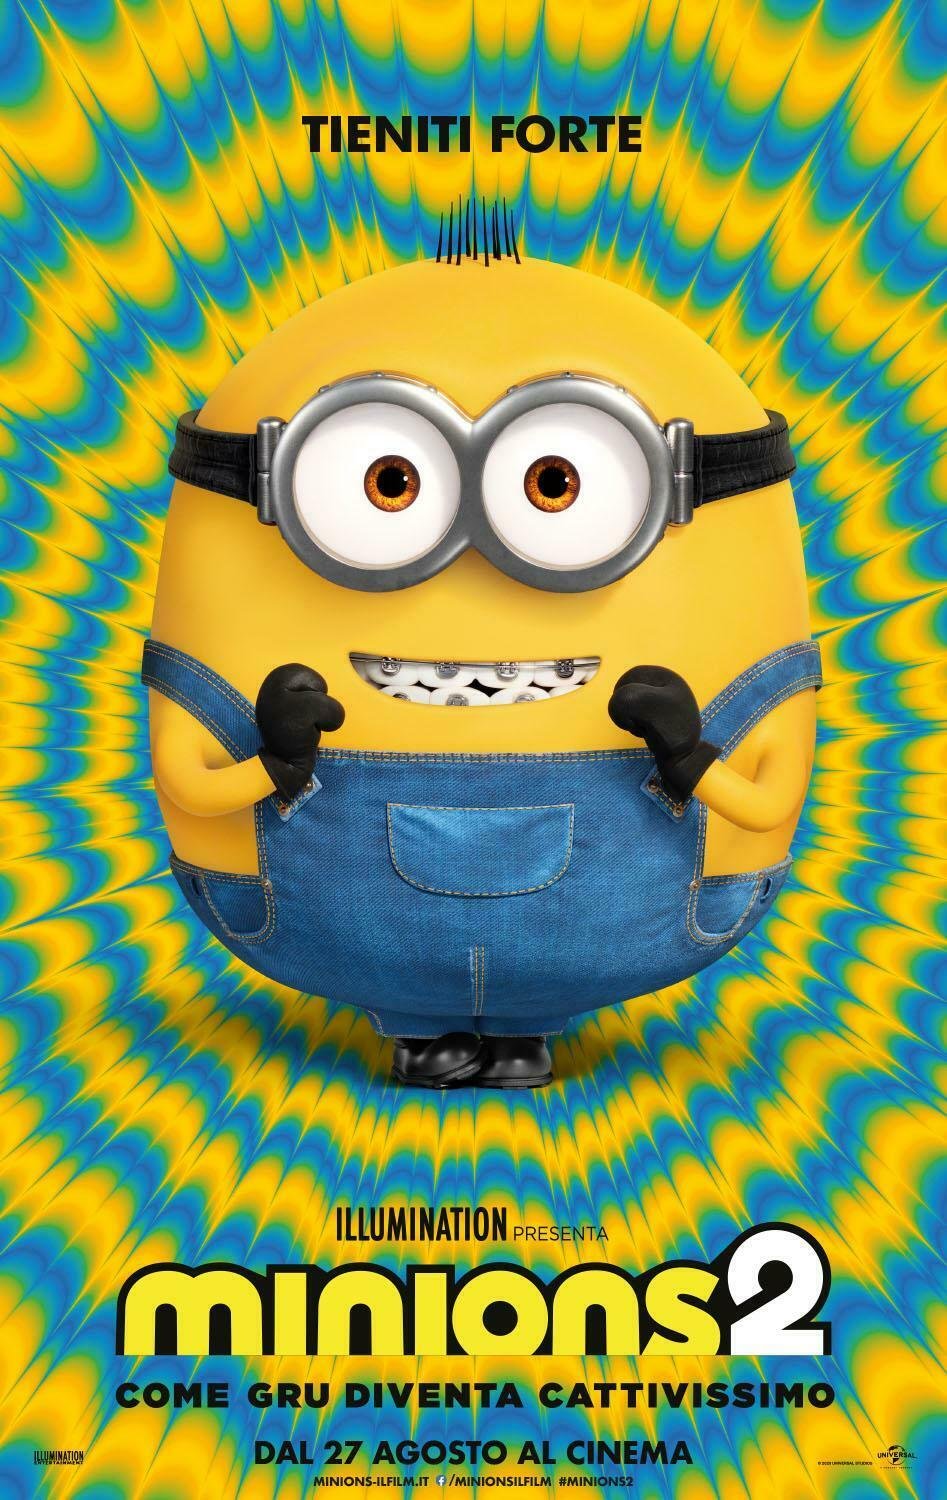 The Italian poster of Minions 2